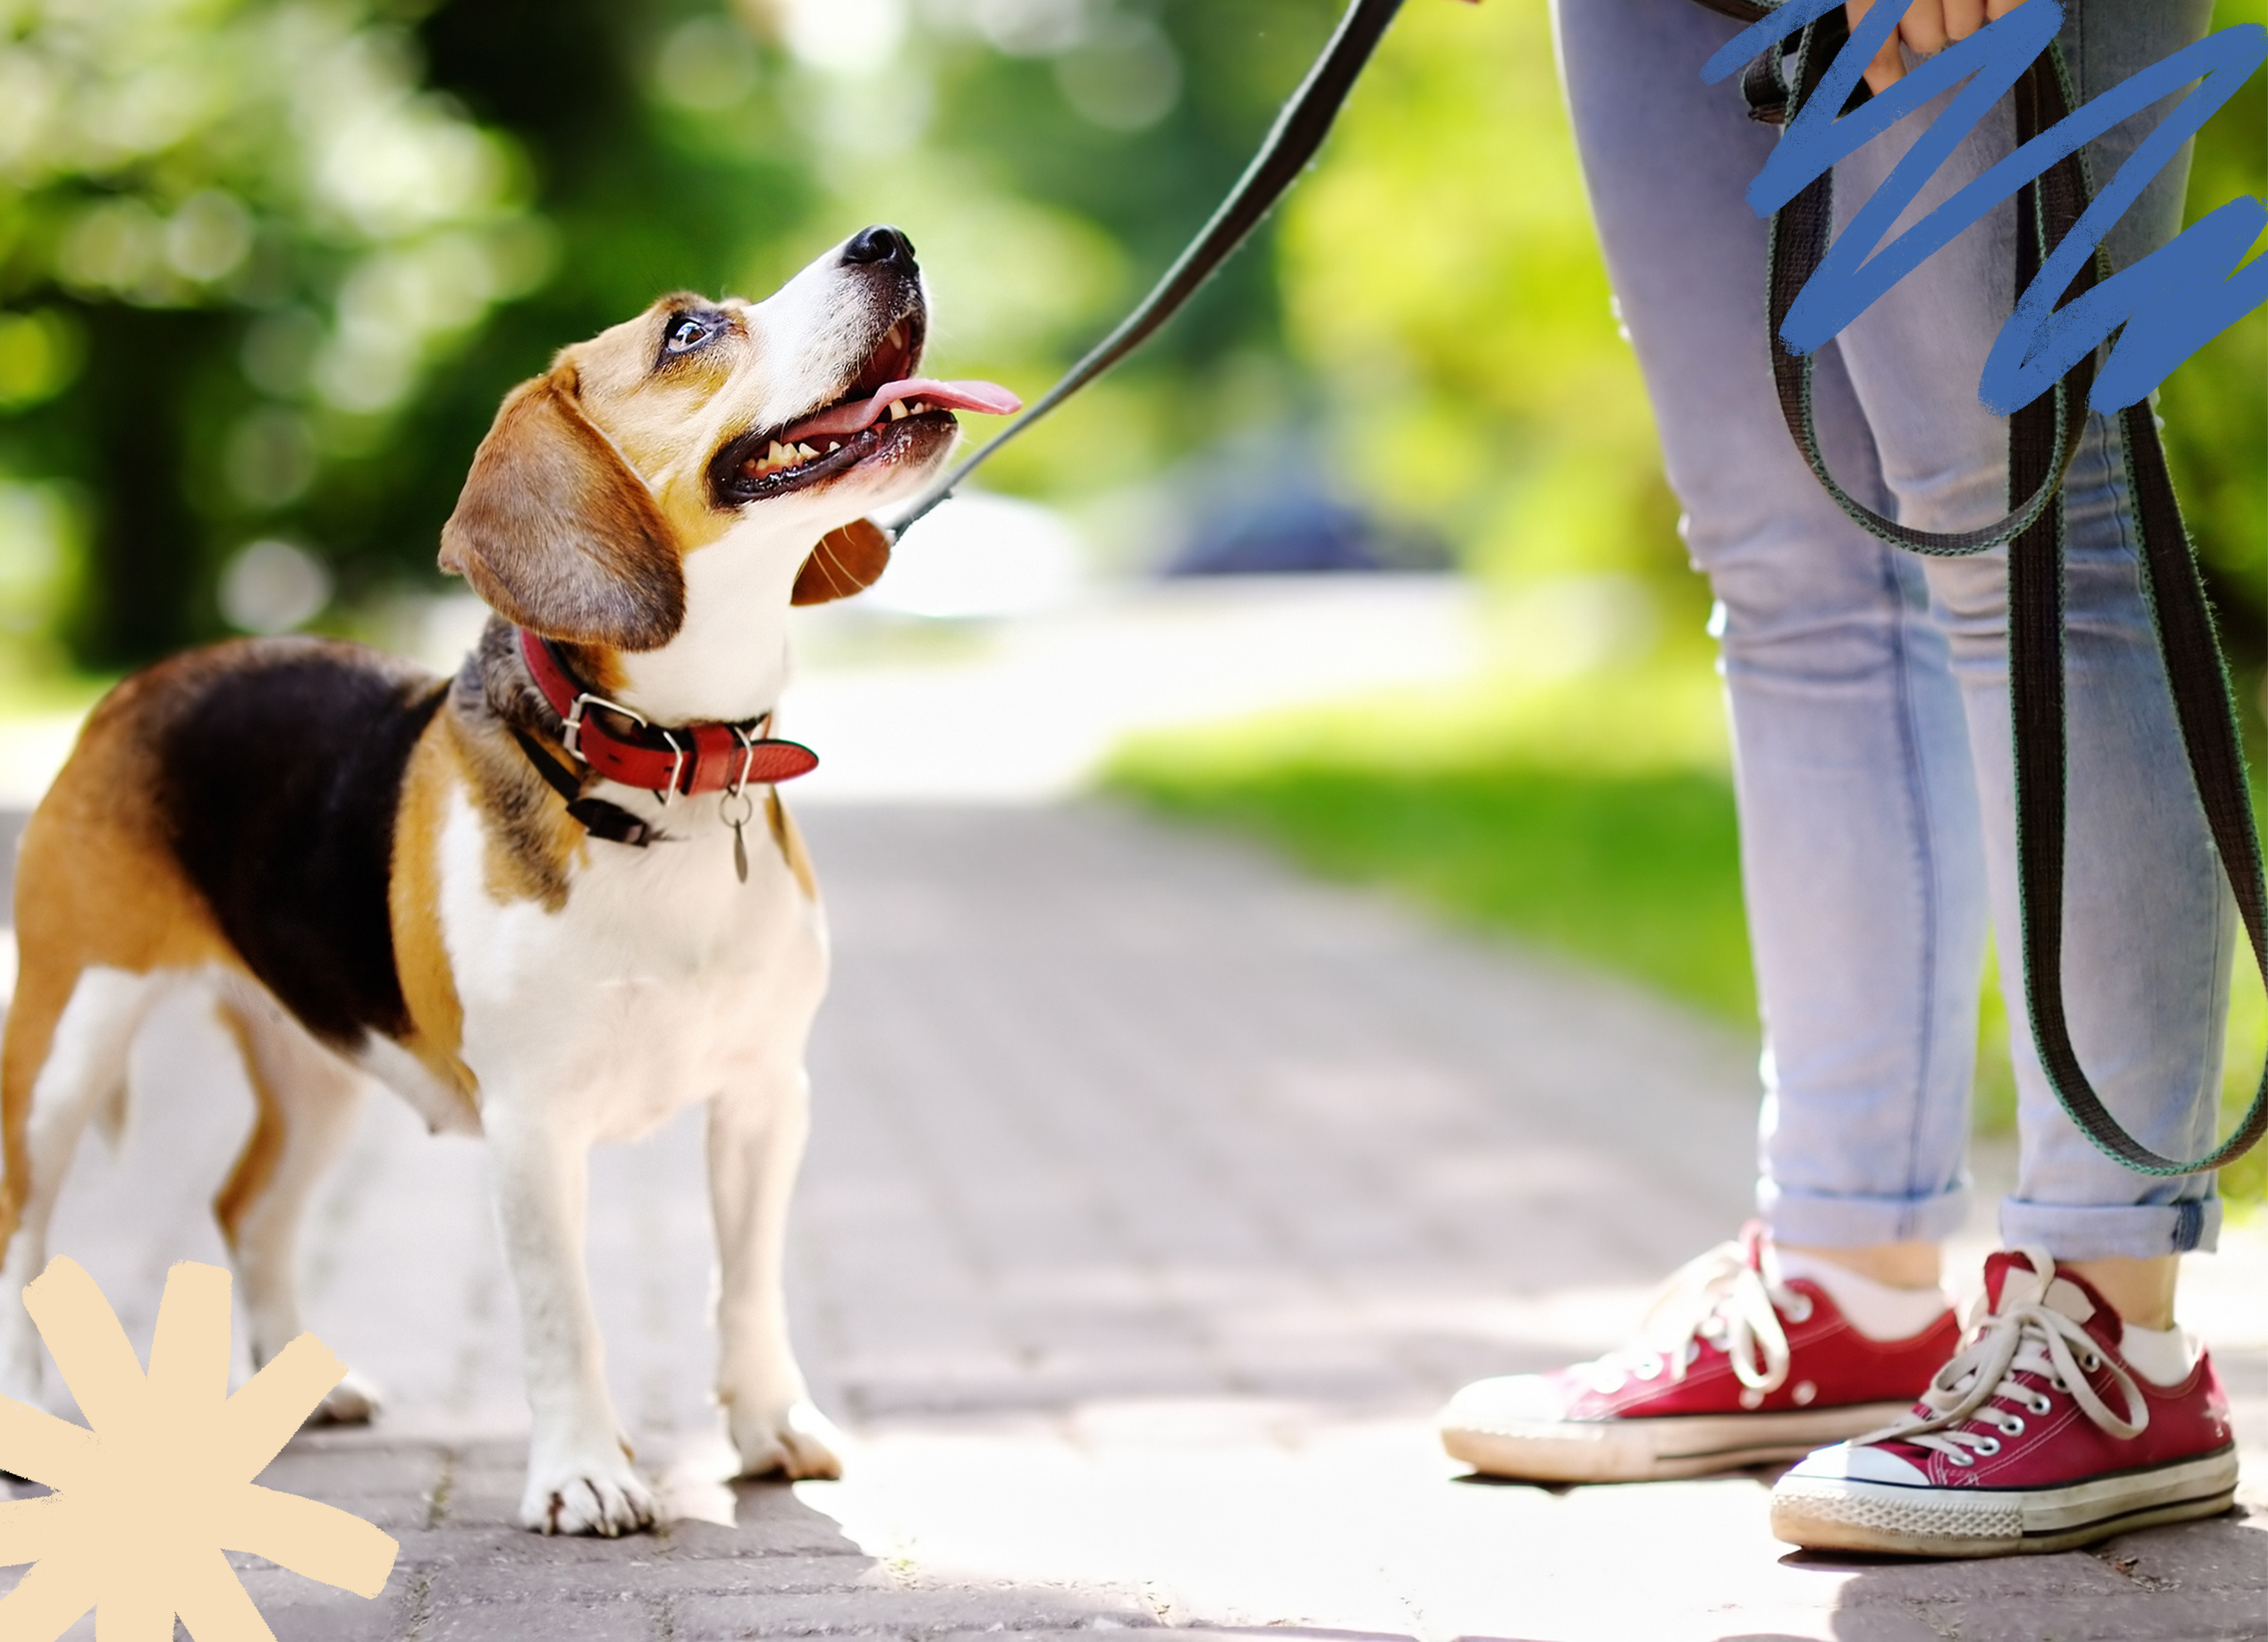 Beagle standing on a sidewalk looking up towards a person that is training him